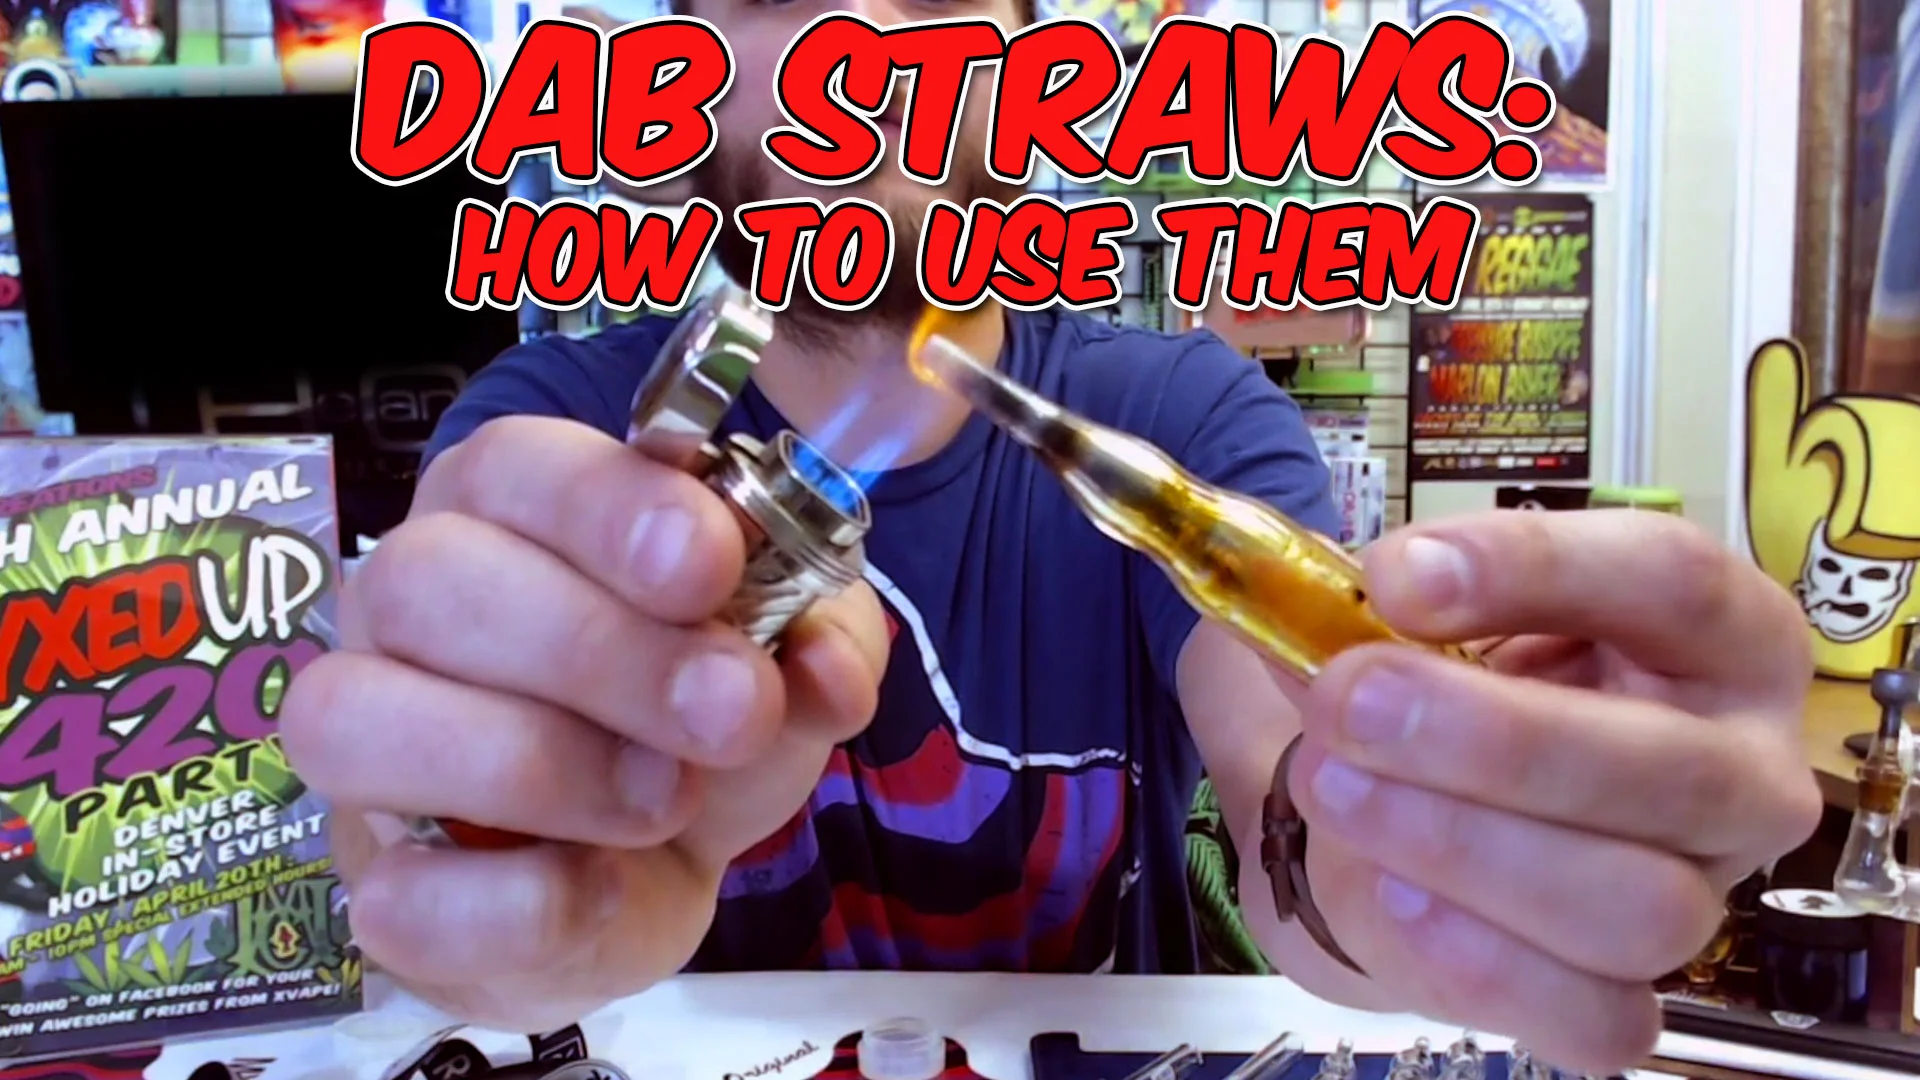 Dab Straws and How to Use Them Tutorial on Vimeo